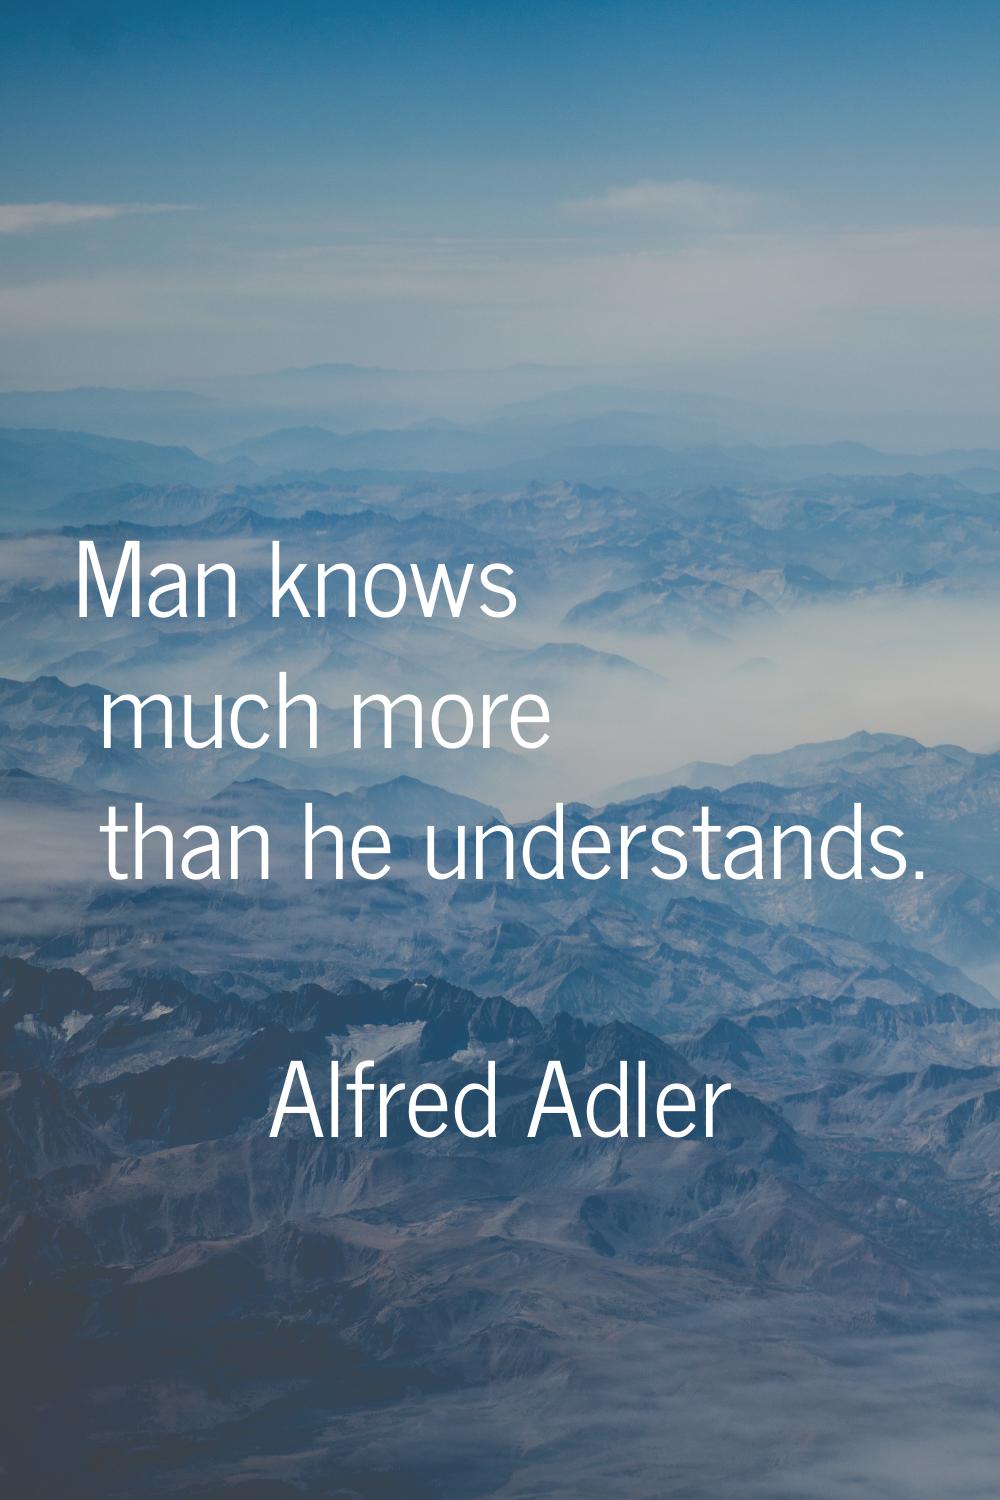 Man knows much more than he understands.